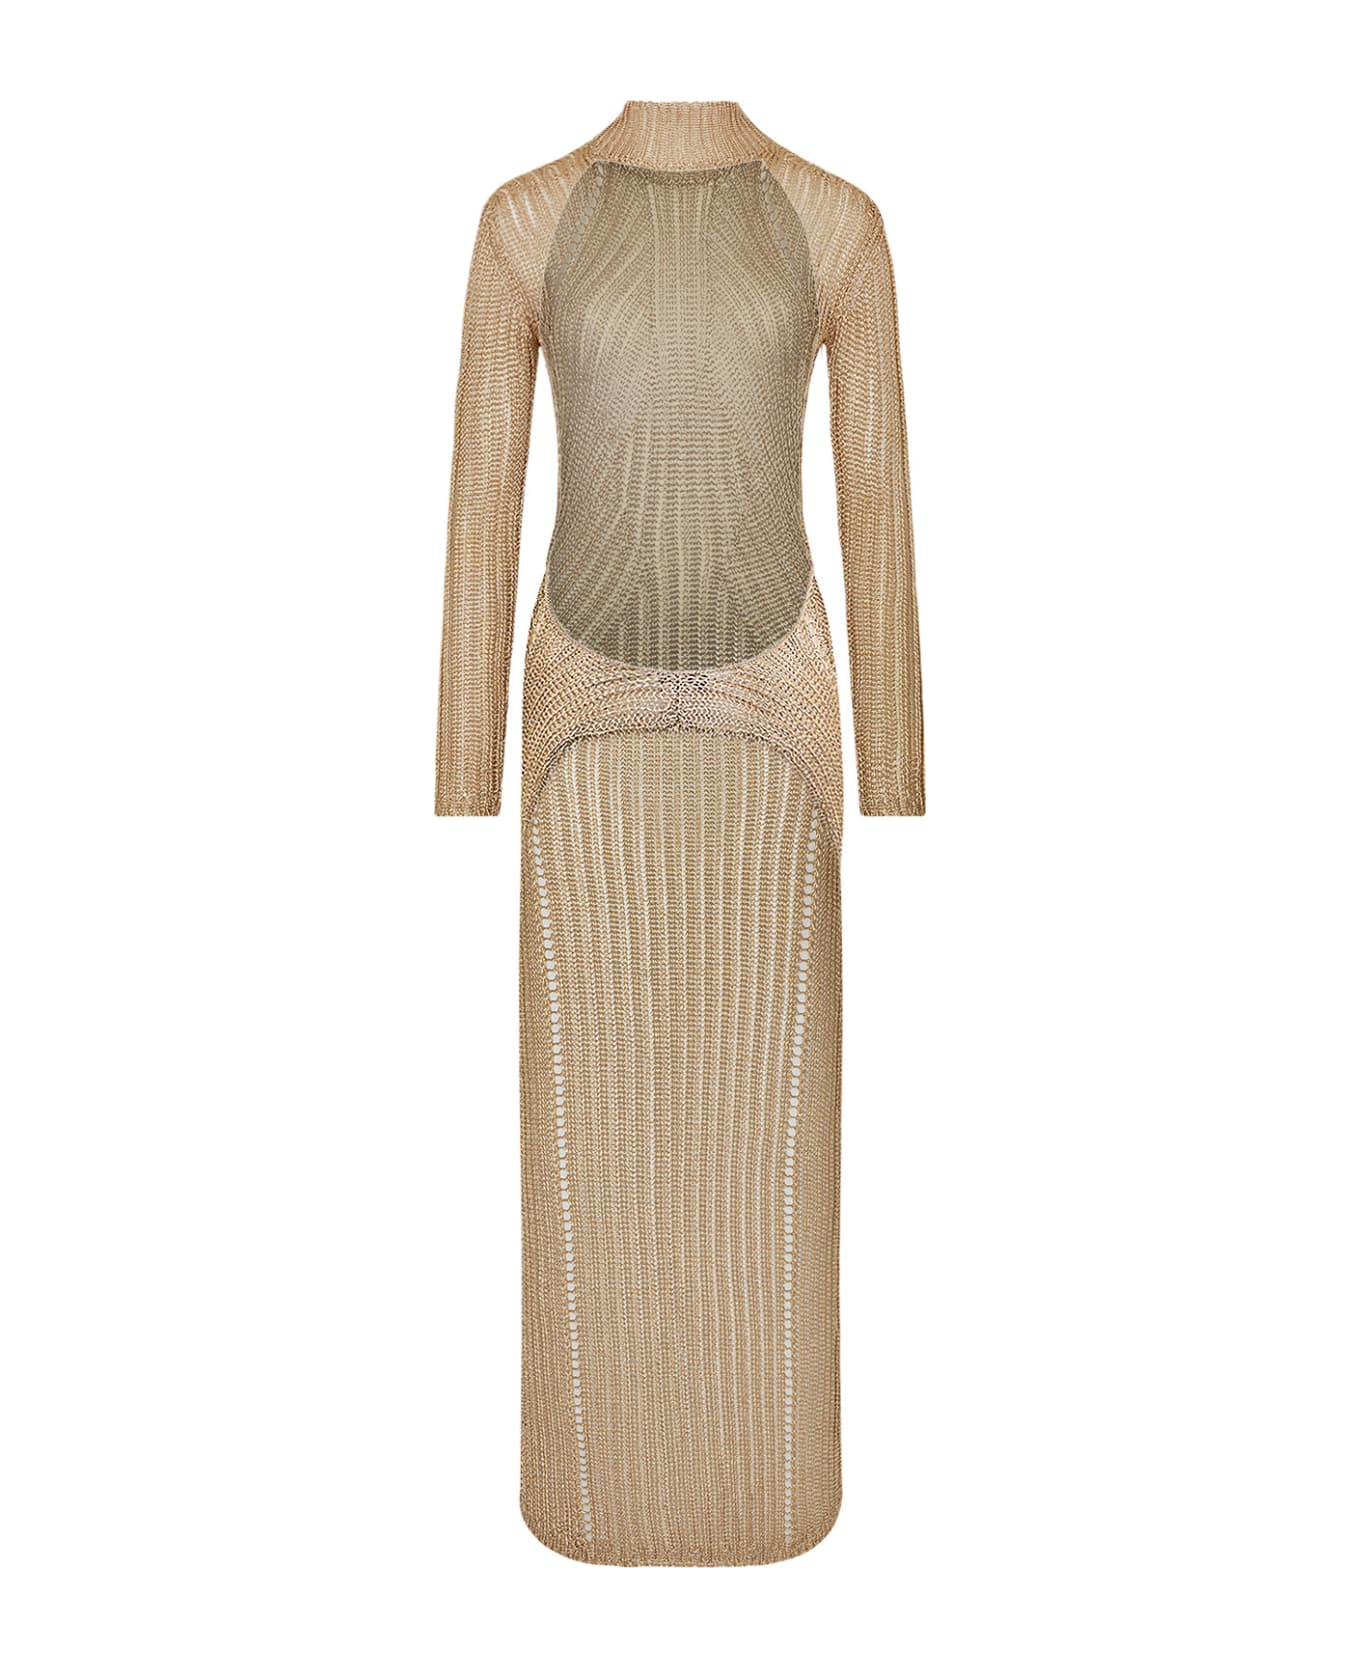 Tom Ford Maxi Cut Out Dress - Gold